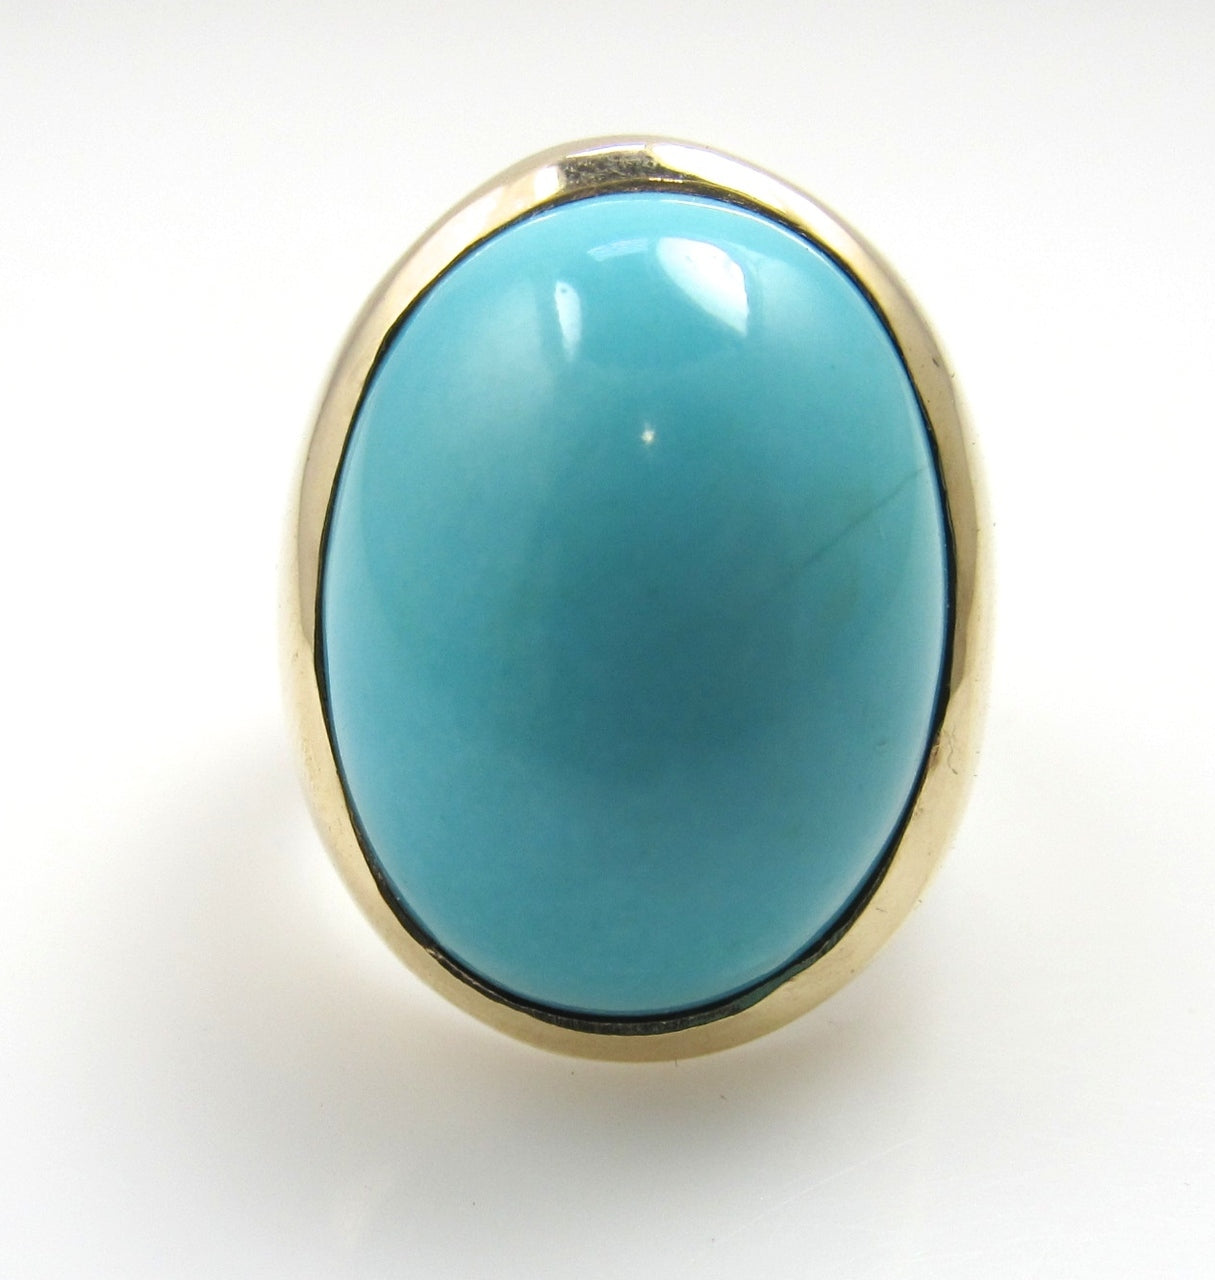 Vintage 14k gold turquoise ring, victorious cape may